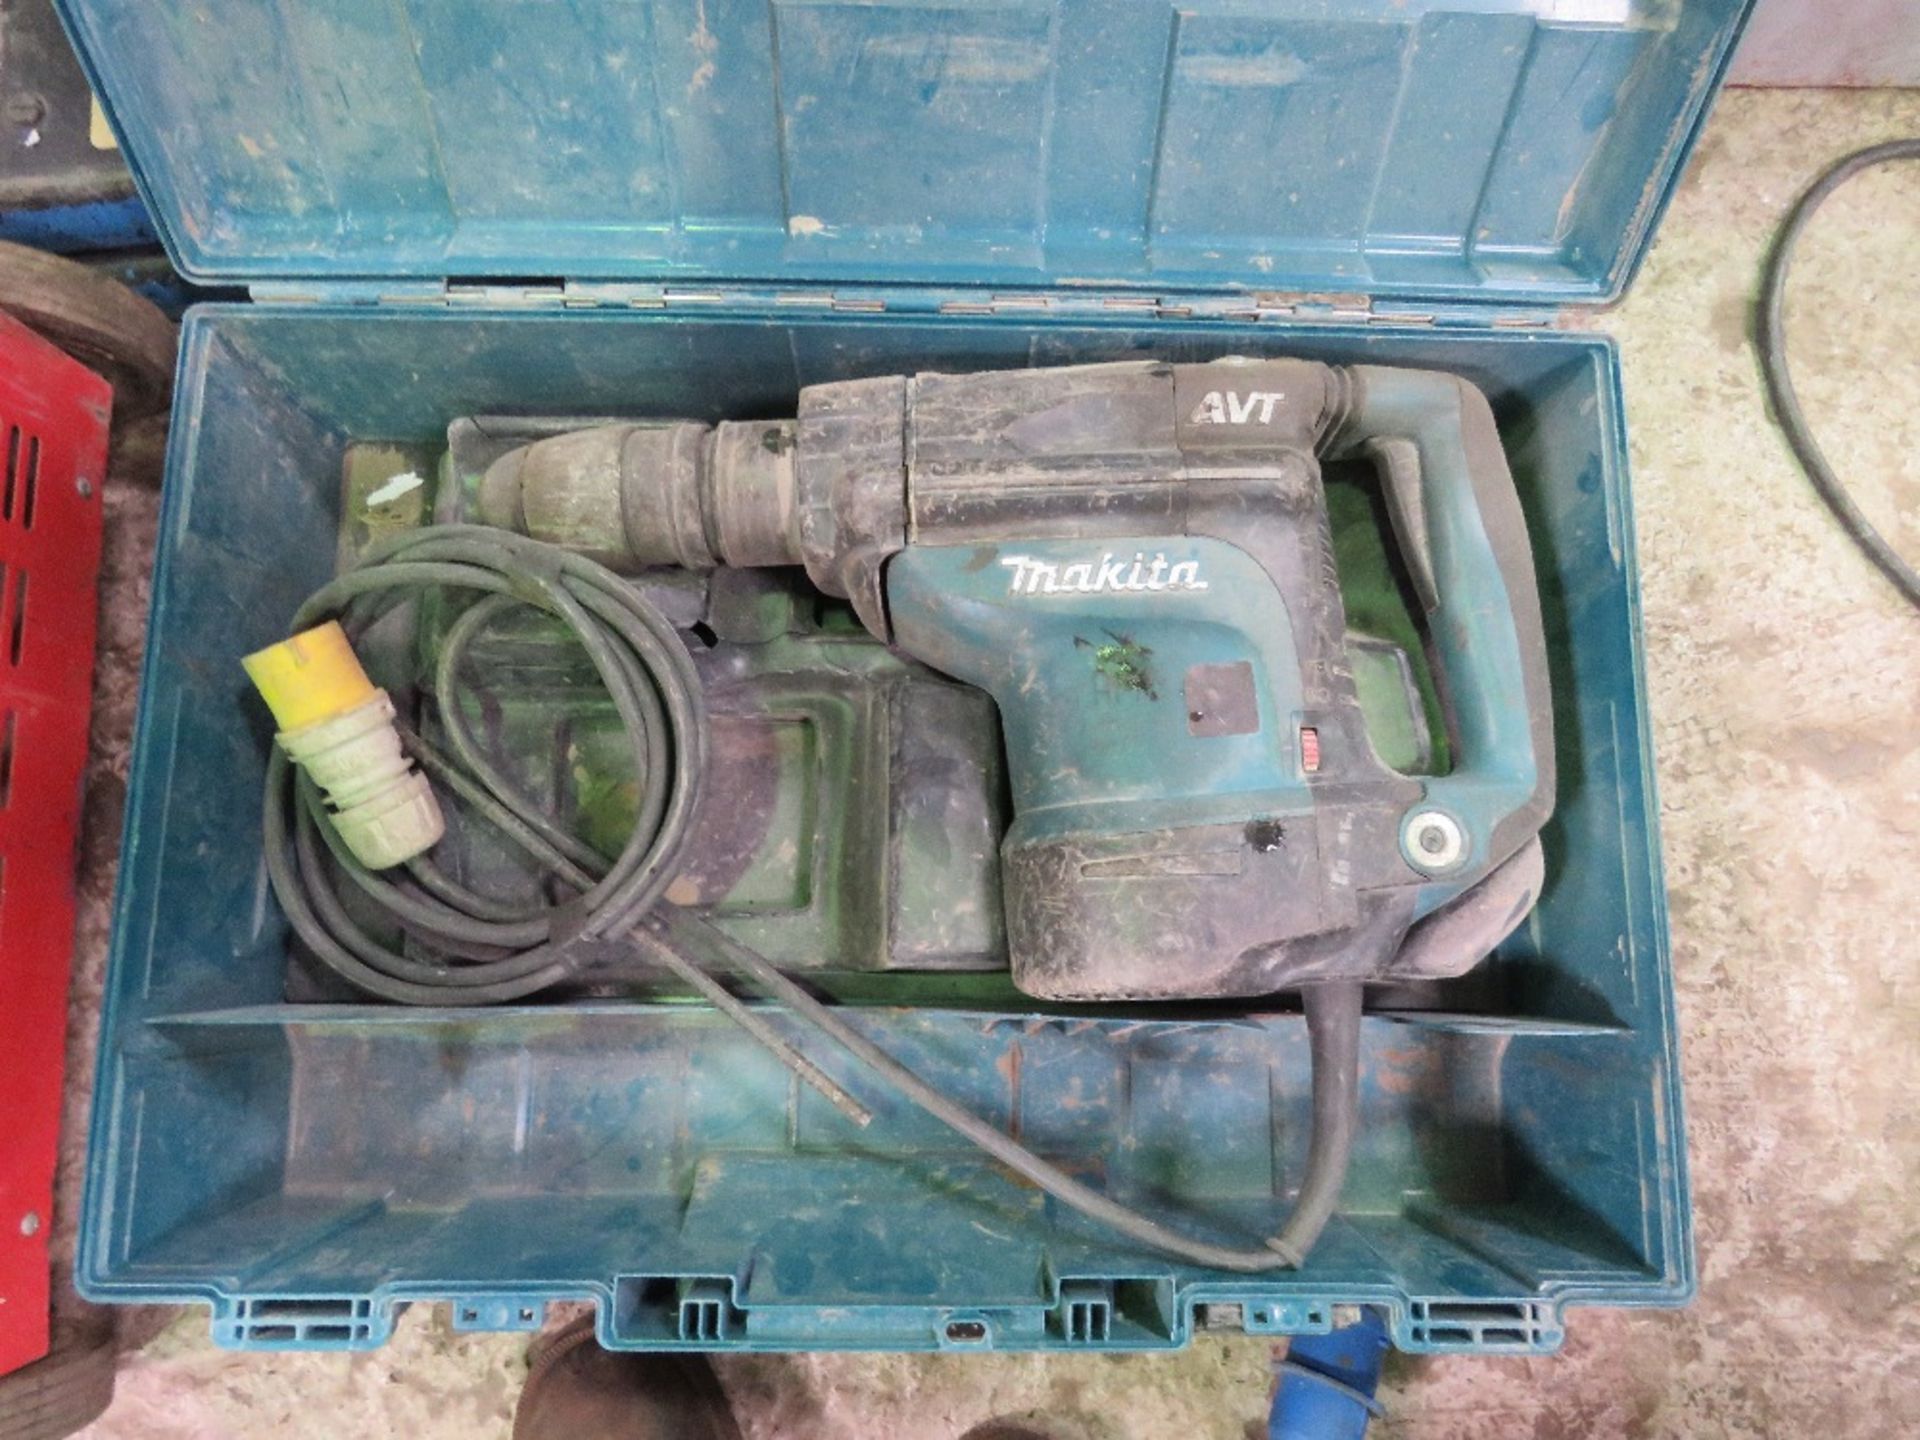 MEDIUM SIZED 110VOLT BREAKER DRILL. THIS LOT IS SOLD UNDER THE AUCTIONEERS MARGIN SCHEME, THEREFORE